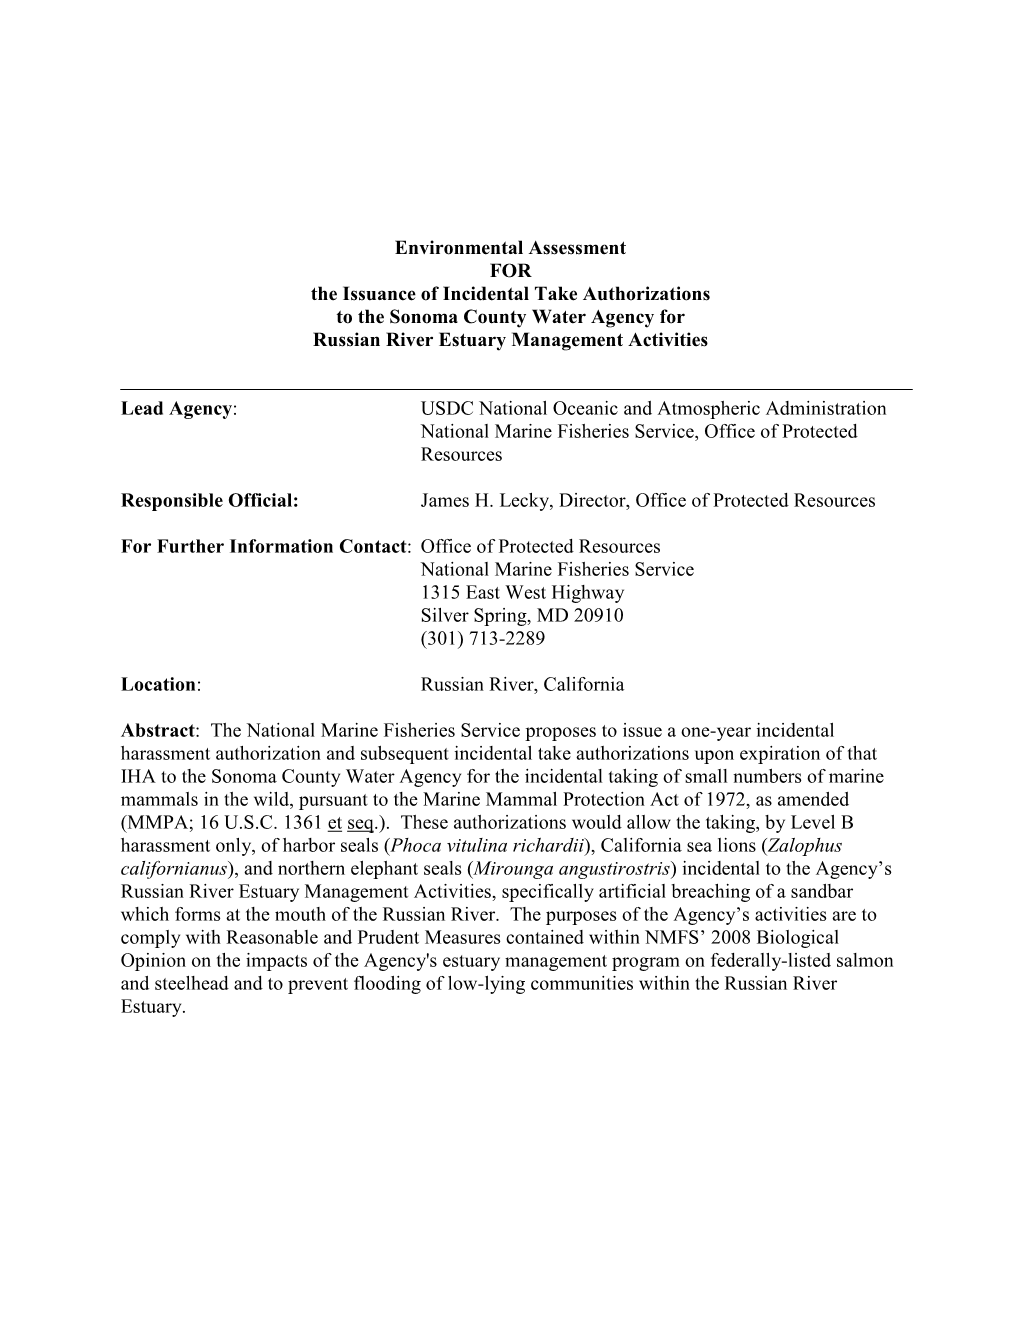 Environmental Assessment for the Issuance of Incidental Take Authorizations to the Sonoma County Water Agency for Russian River Estuary Management Activities